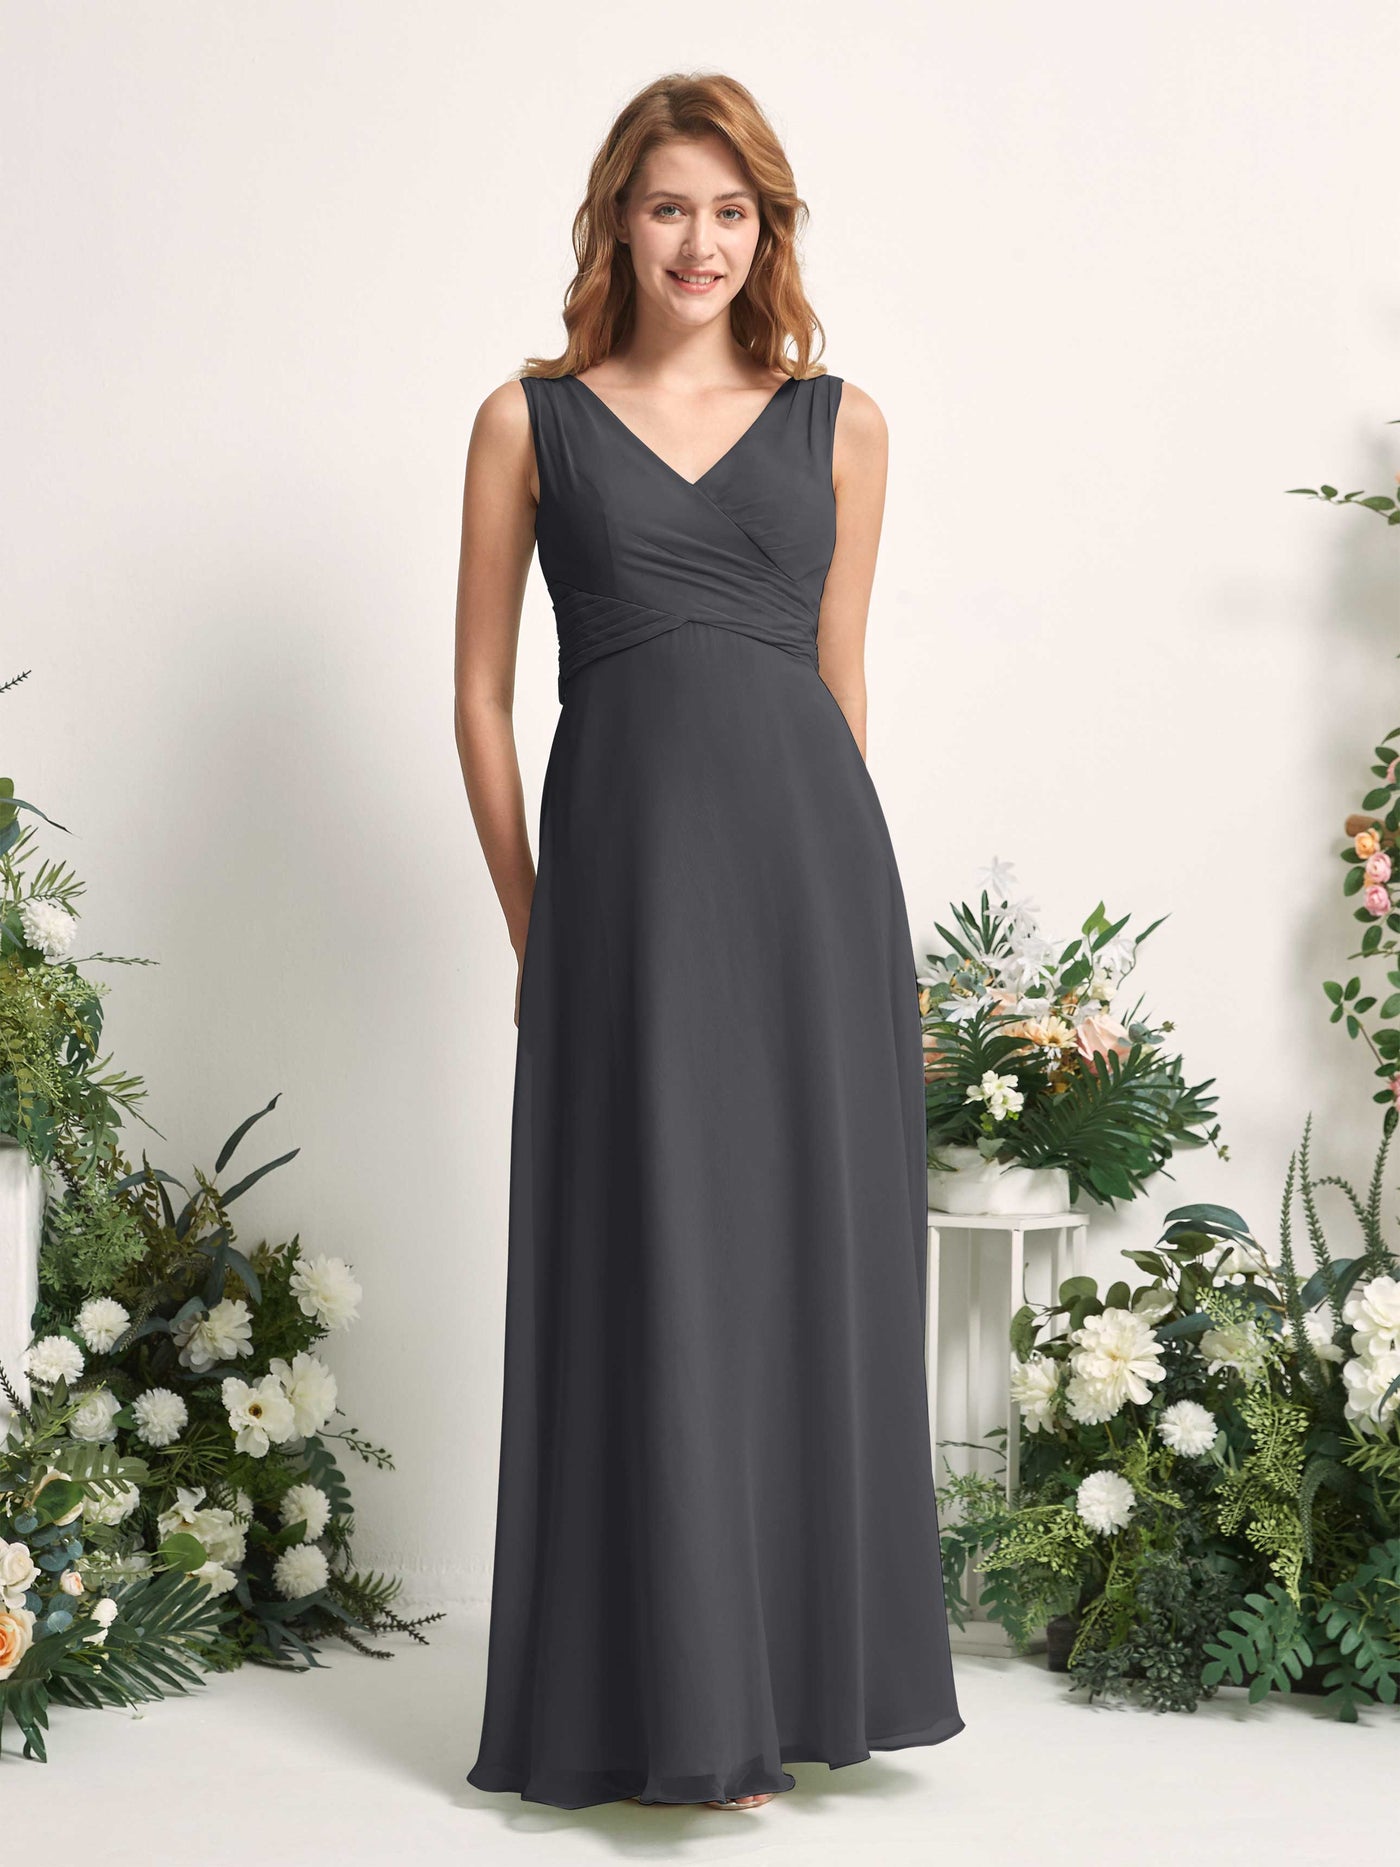 Bridesmaid Dress A-line Chiffon Straps Full Length Sleeveless Wedding Party Dress - Pewter (81227338)#color_pewter